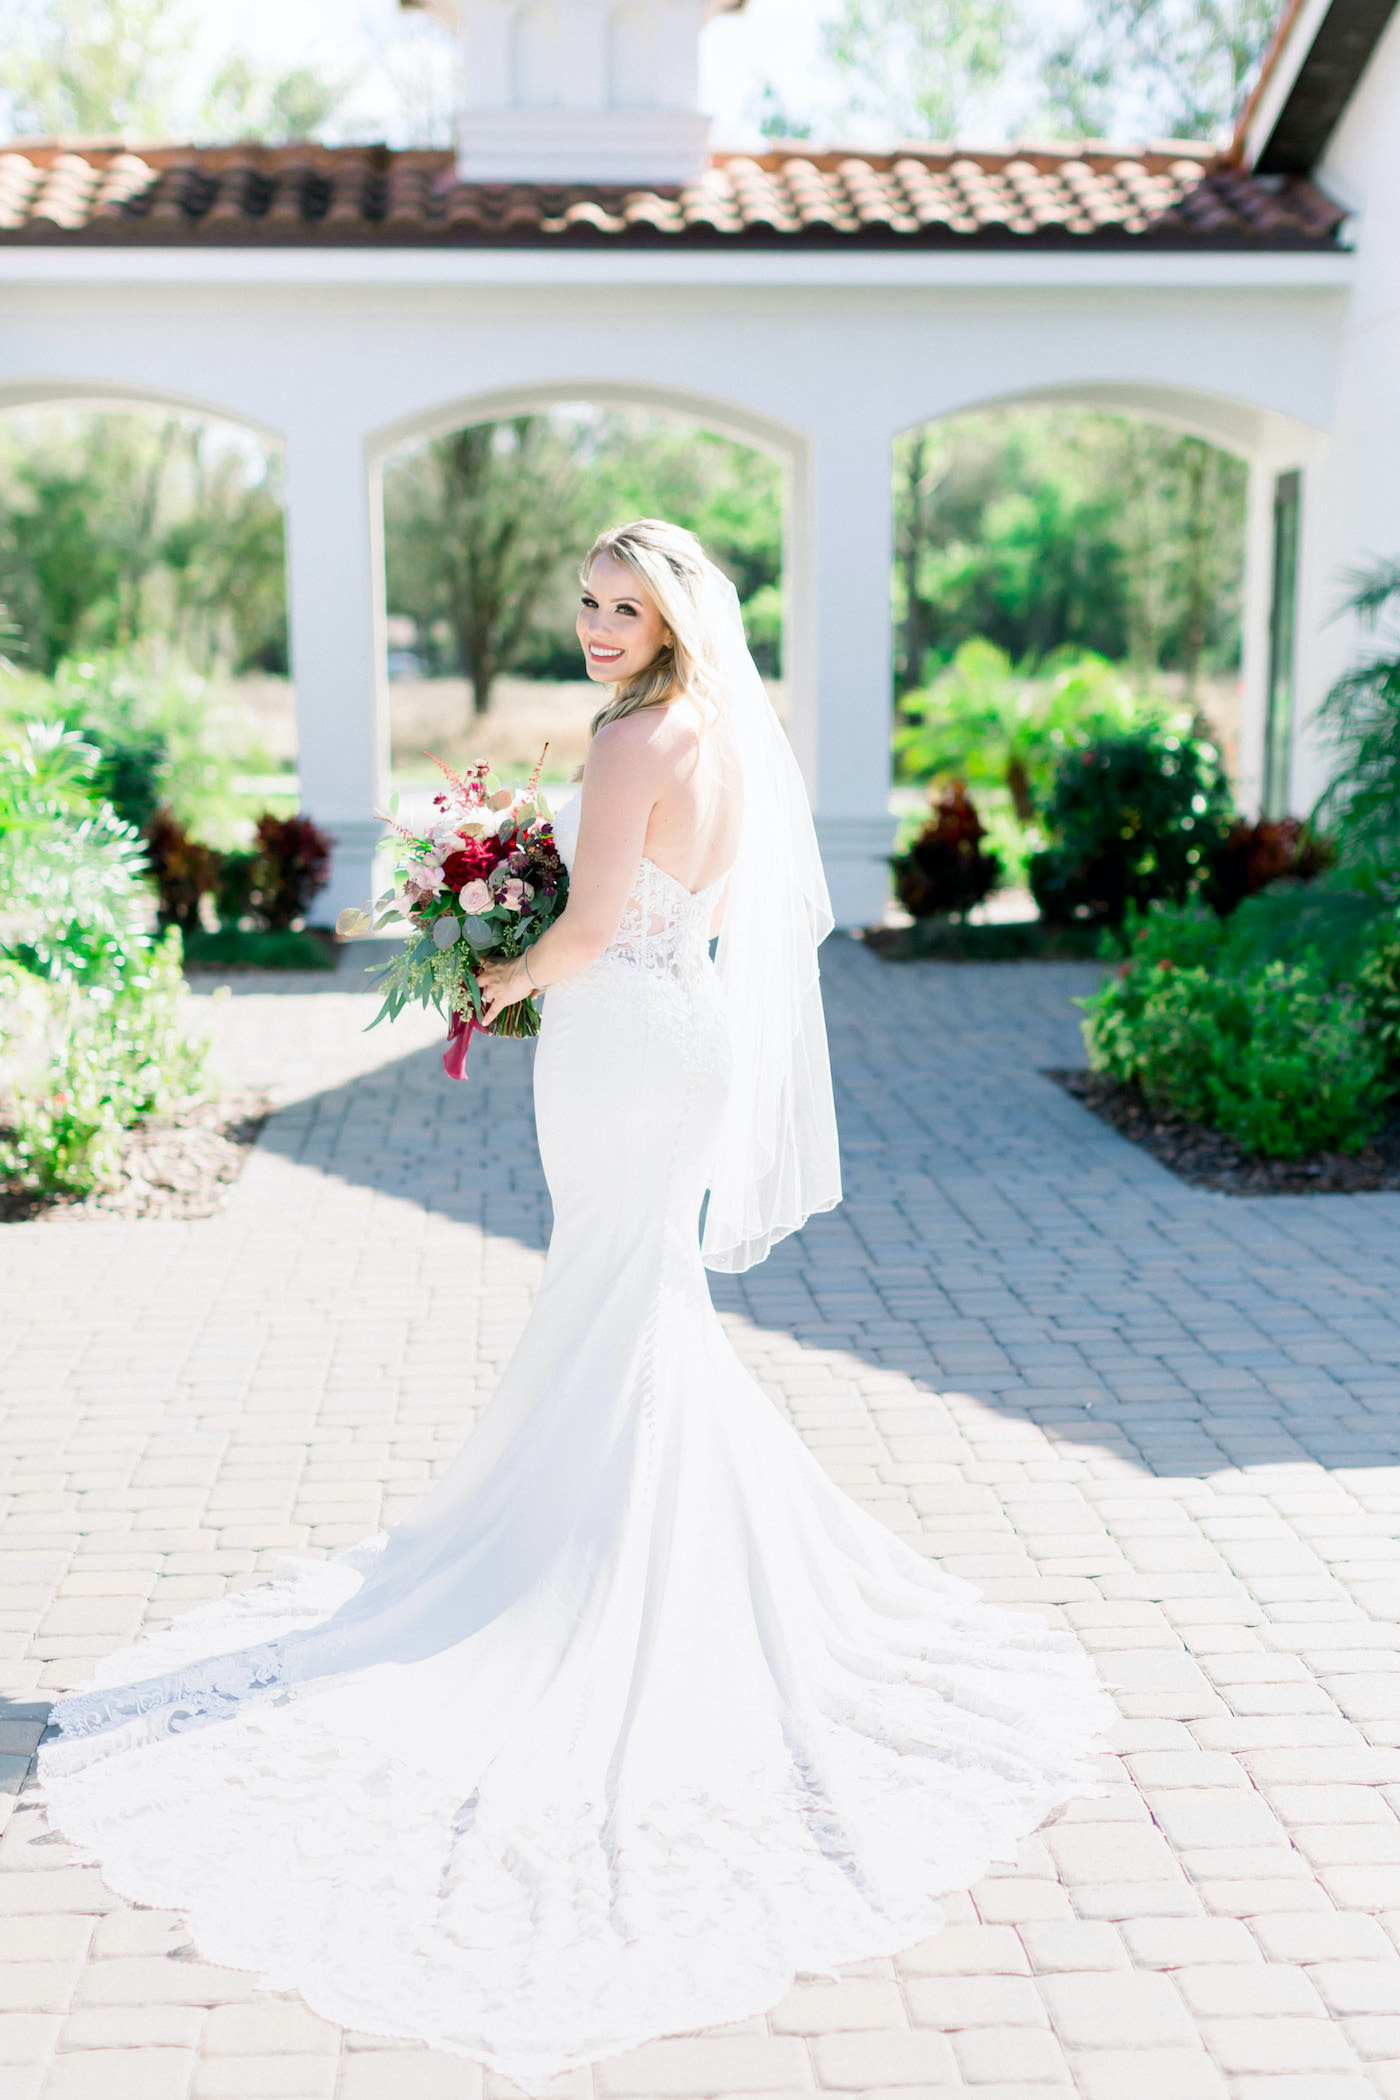 Outdoor Bridal Portrait | Ivory Sheath Mermaid Wedding Dress with Illusion Lace Train and Fingertip Veil | Shauna and Jordon Photography